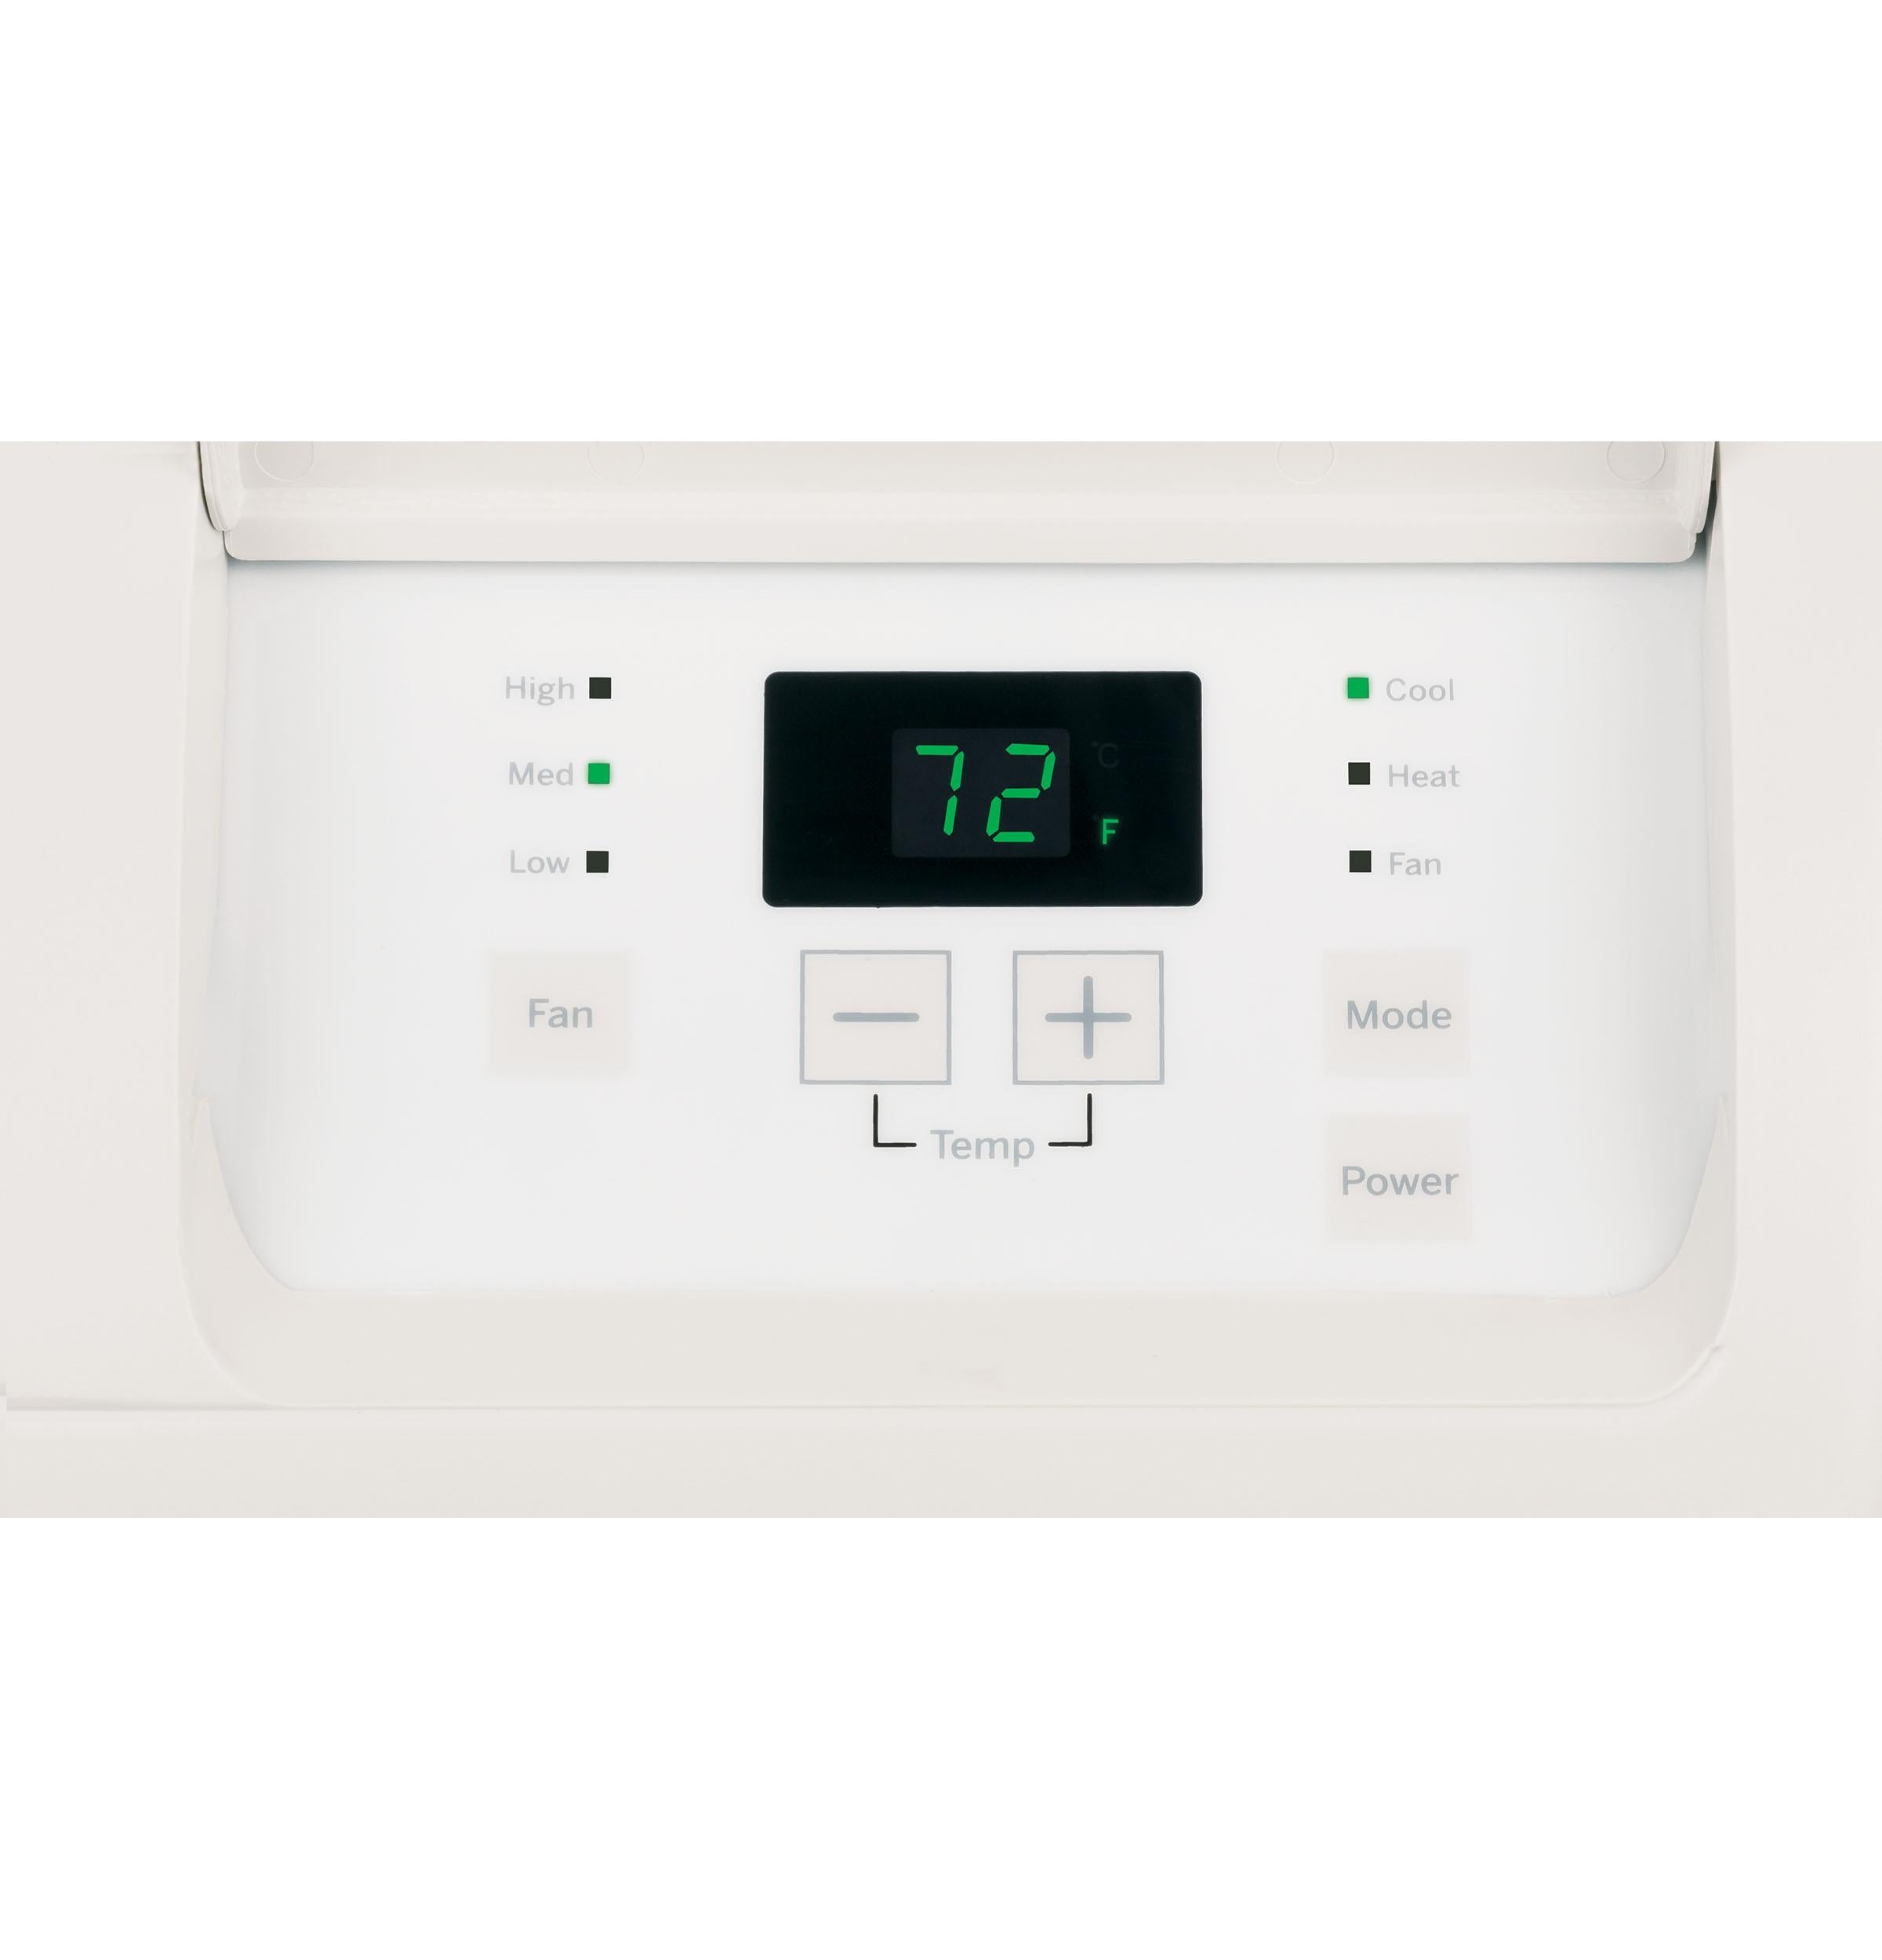 Hotpoint® PTAC with Electric Heat 15,000 BTU, 30 amps, 230/208 Volt